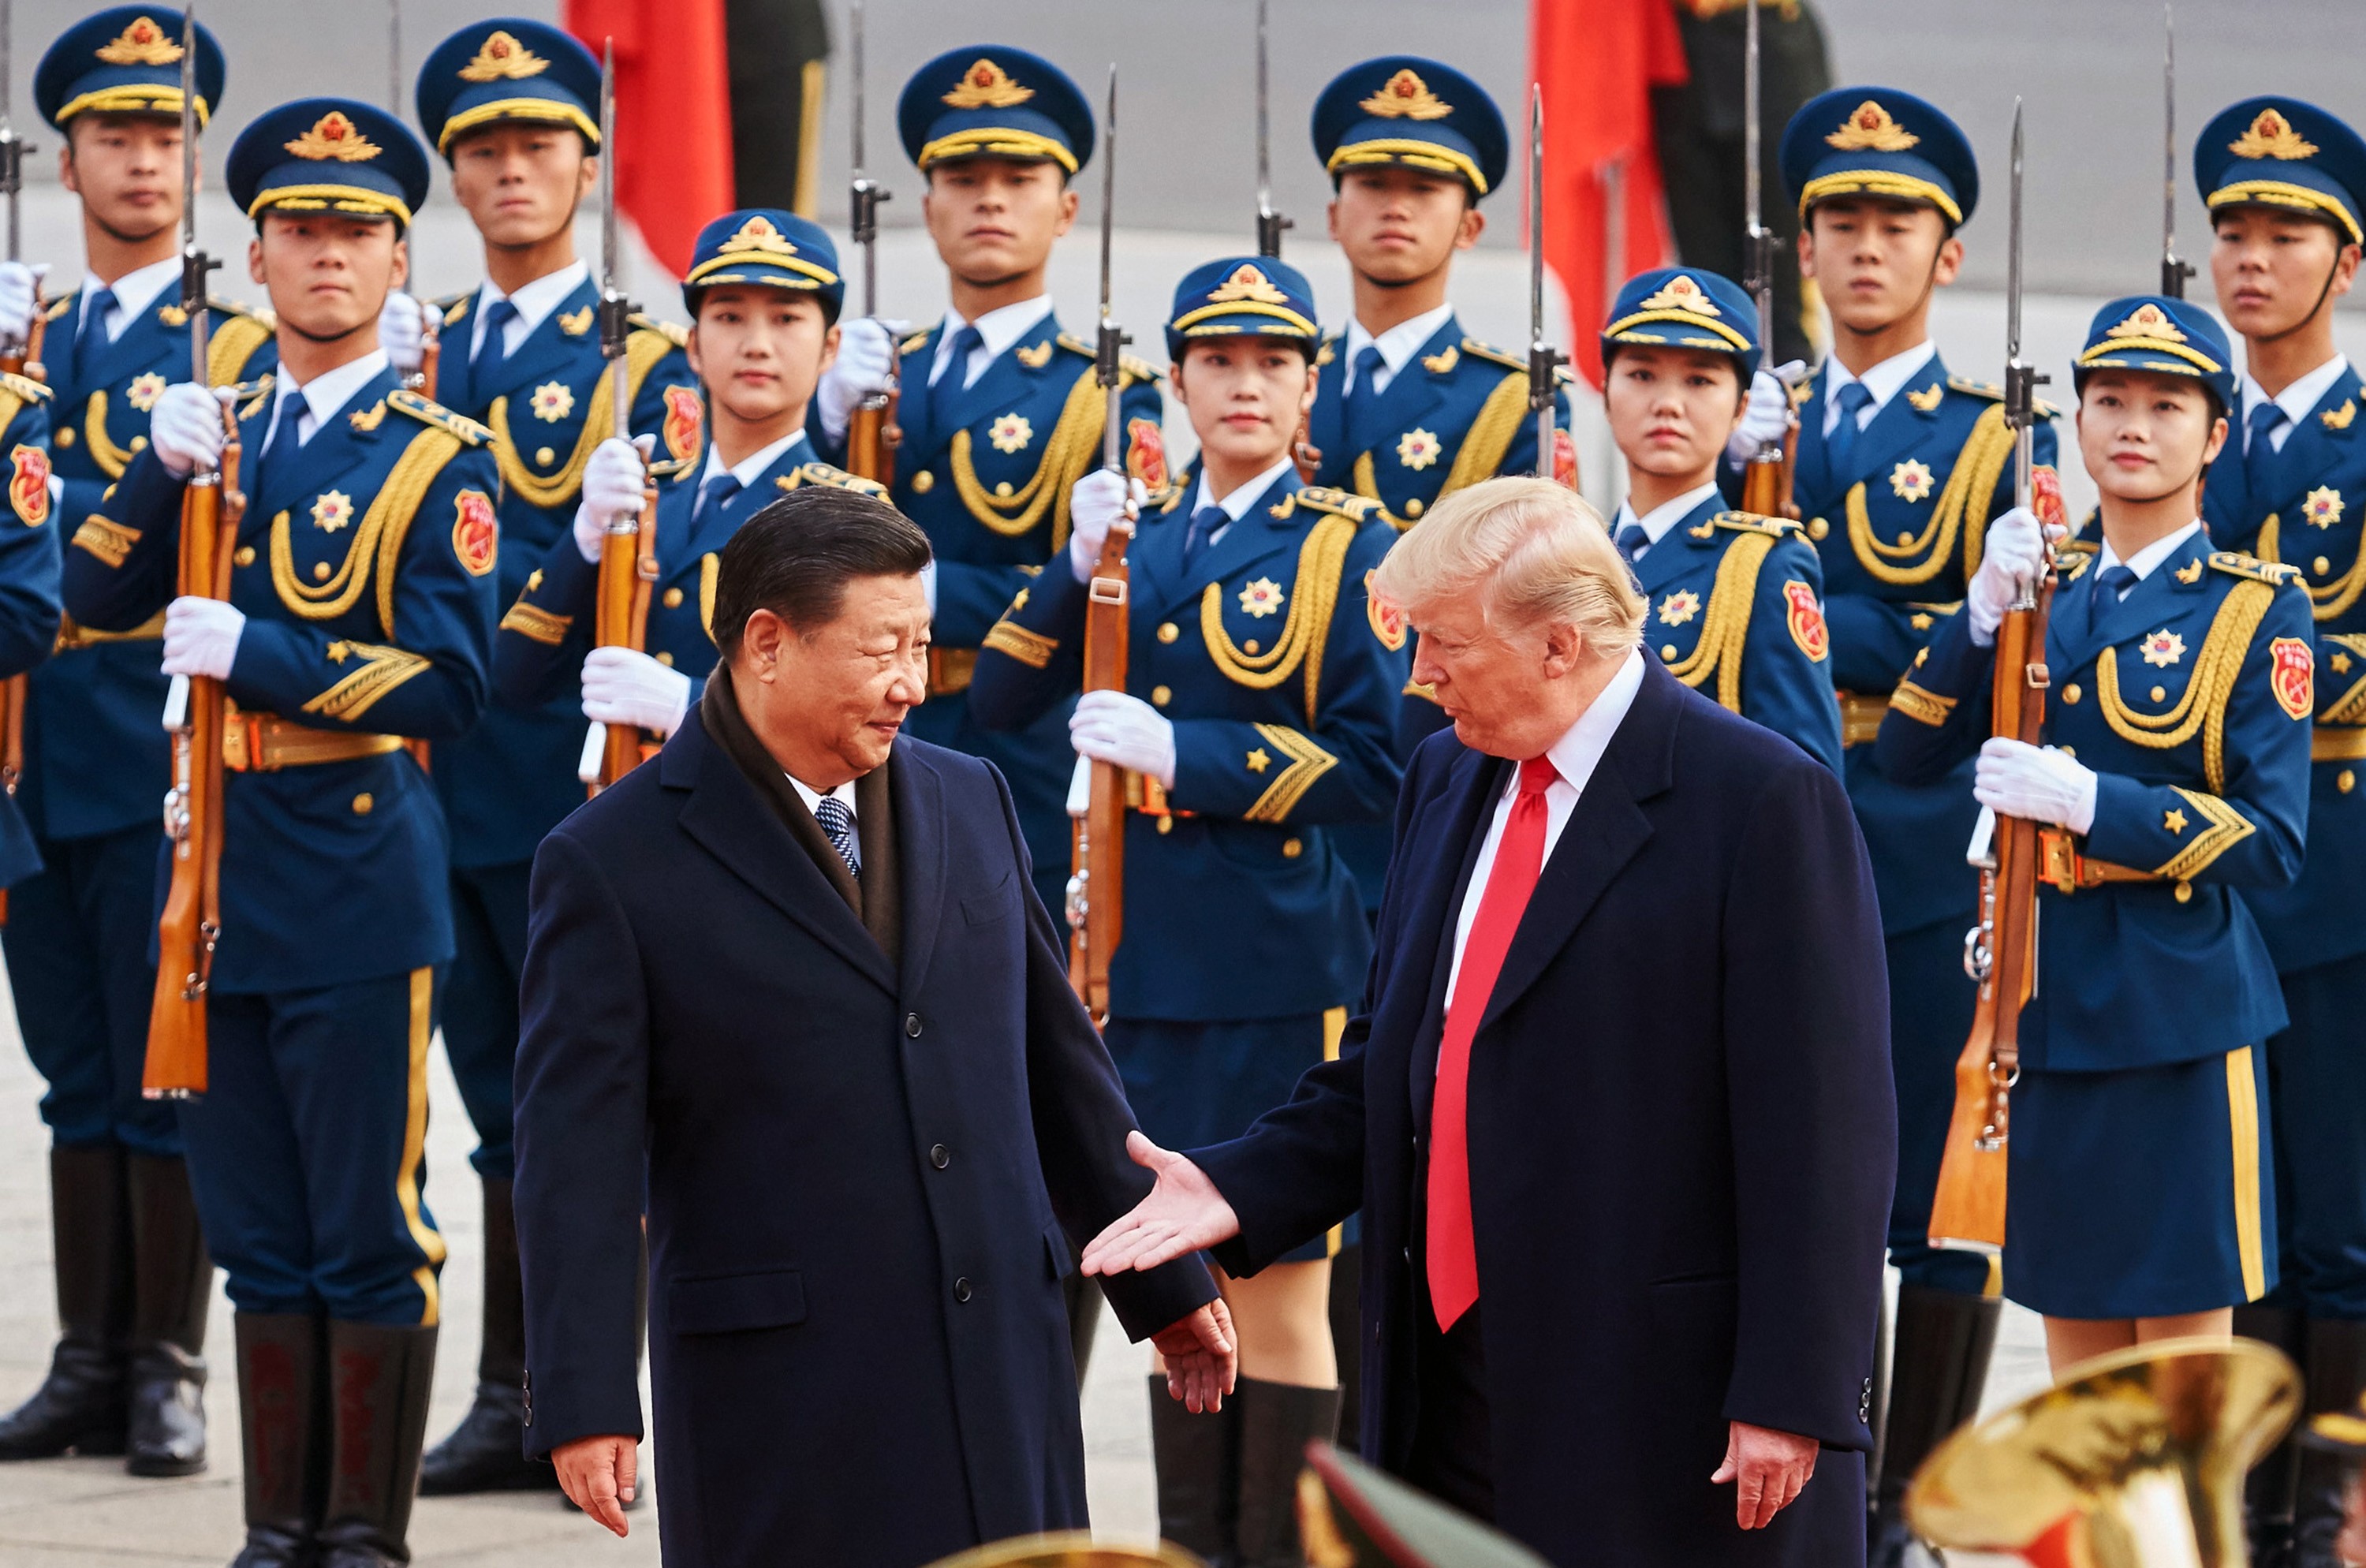 China's President Xi Jinping and US President Donald Trump outside the Great Hall of the People in Beijing. Photo: TNS